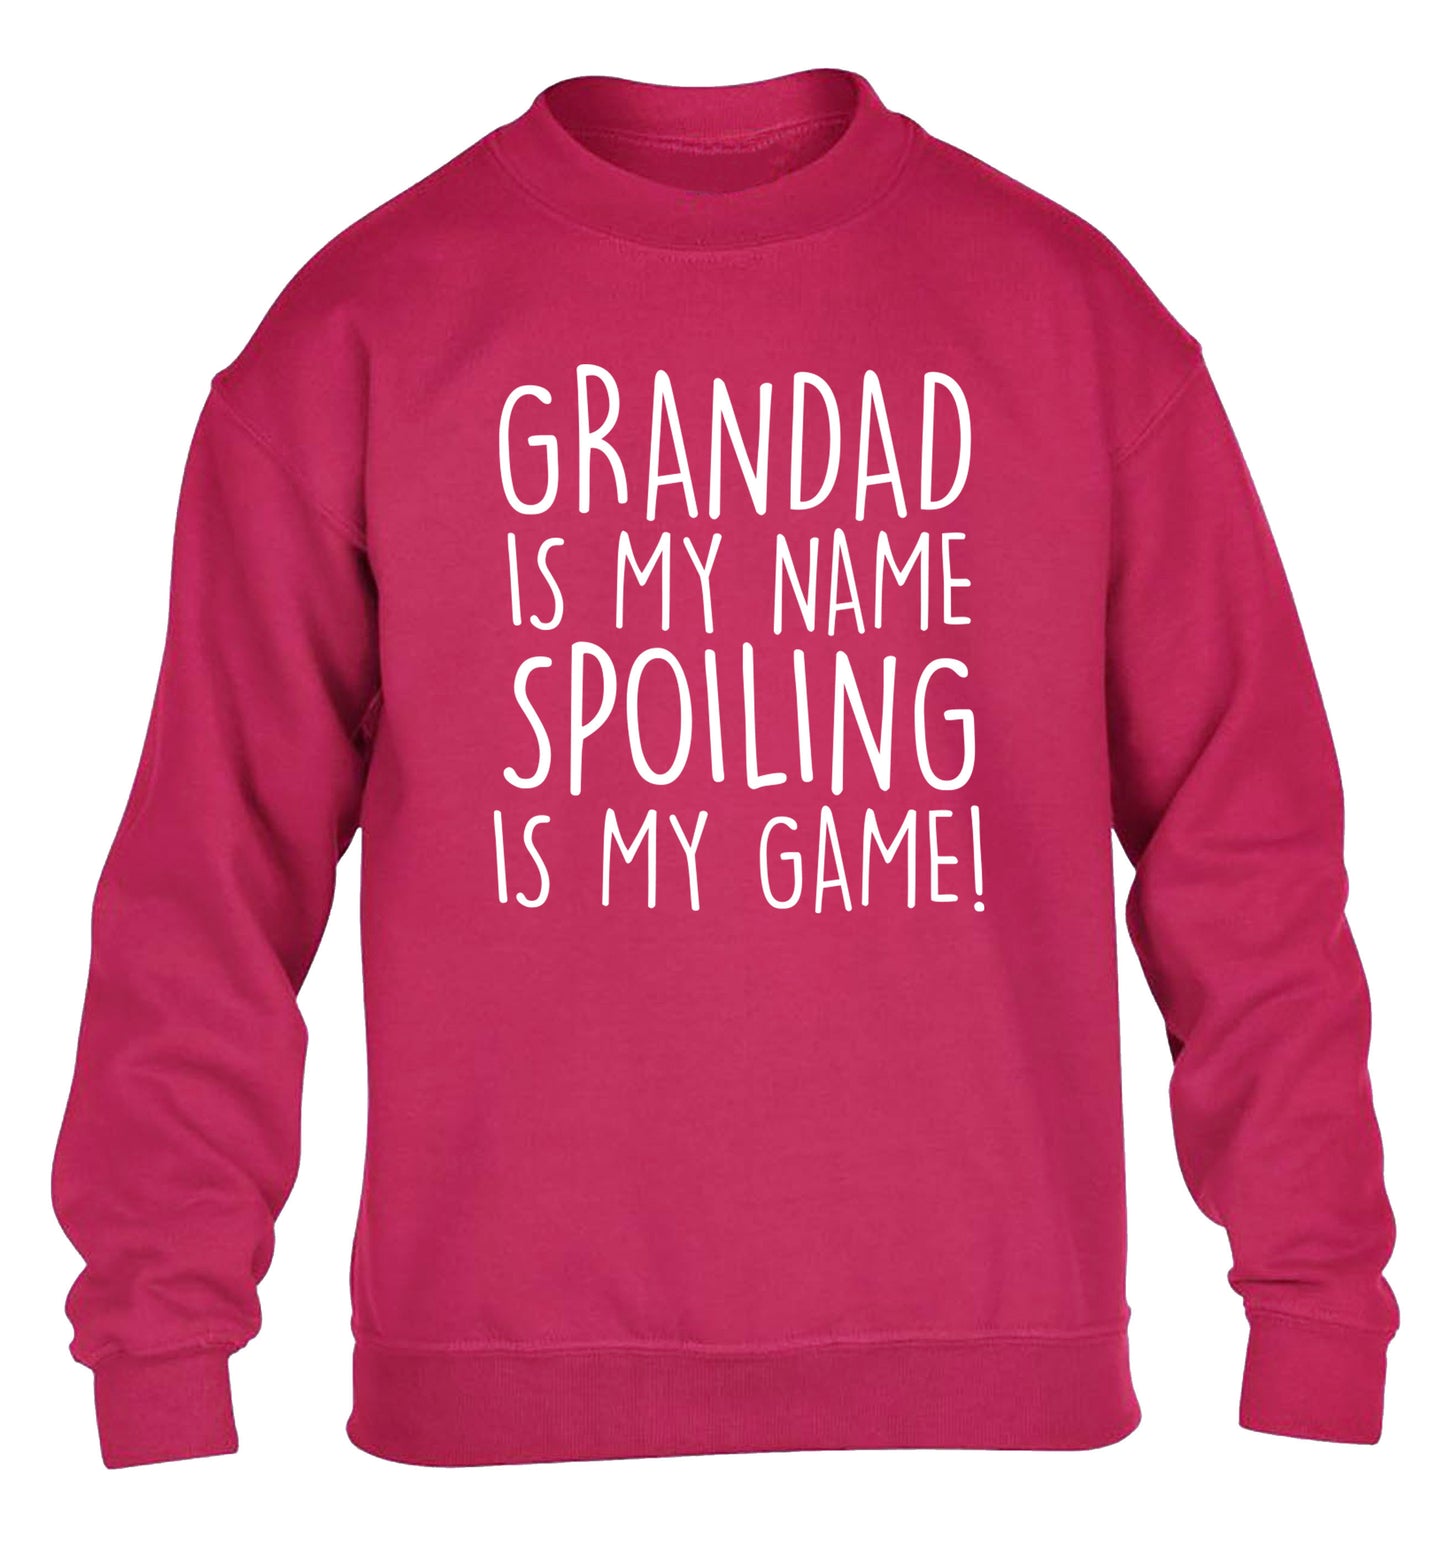 Grandad is my name, spoiling is my game children's pink sweater 12-14 Years